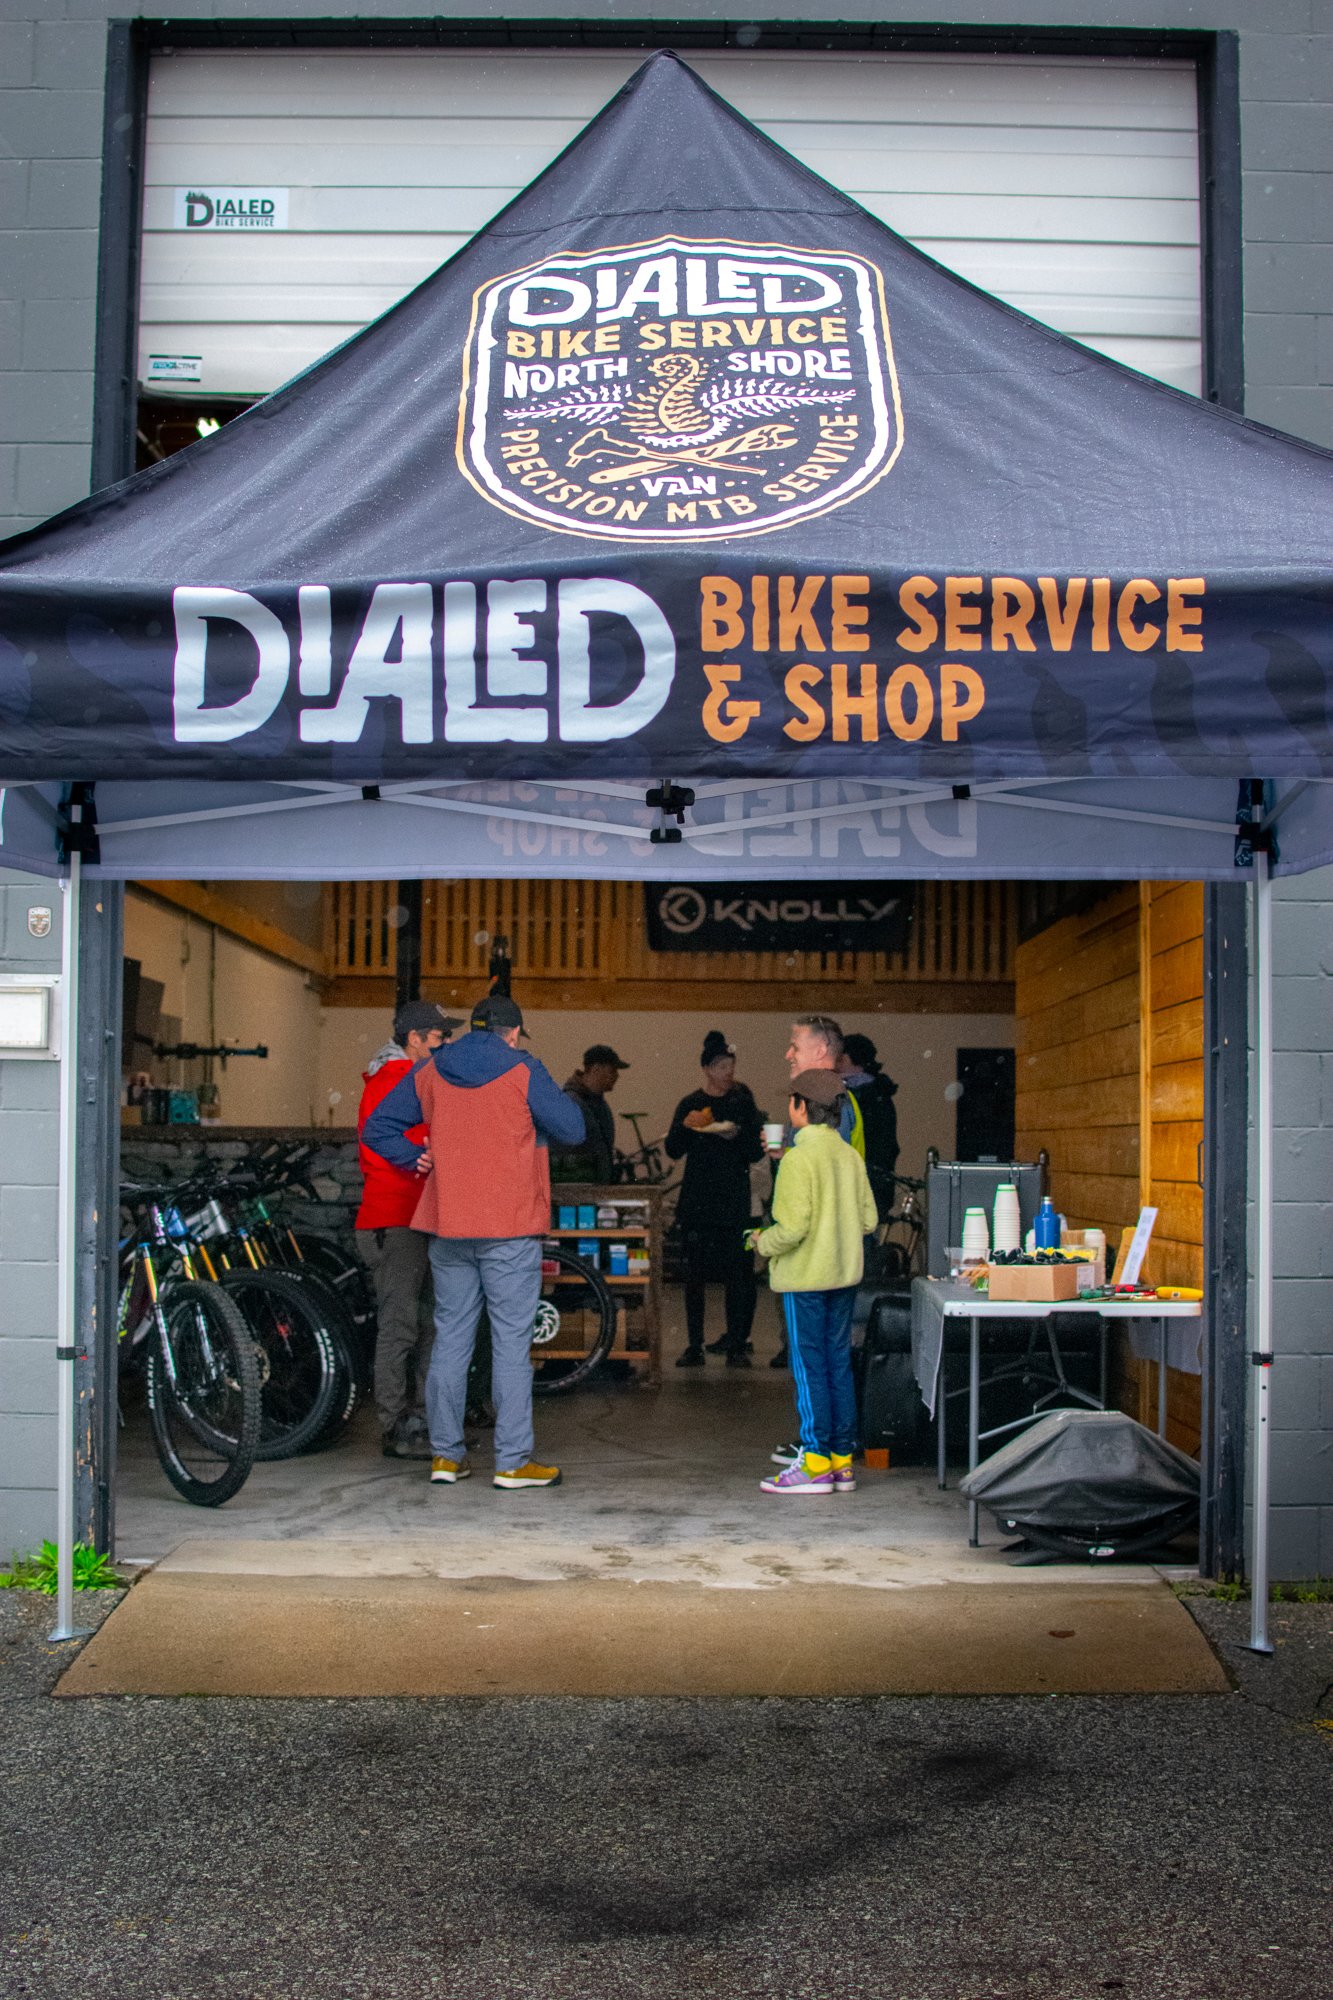 A huge thank you to everyone that showed up for our event on Saturday! The weather wasn't perfect (actually it was miserable), but that didn't stop a whole bunch of you coming down to check things out!
.
Massive thanks to the teams at @knollybikes an